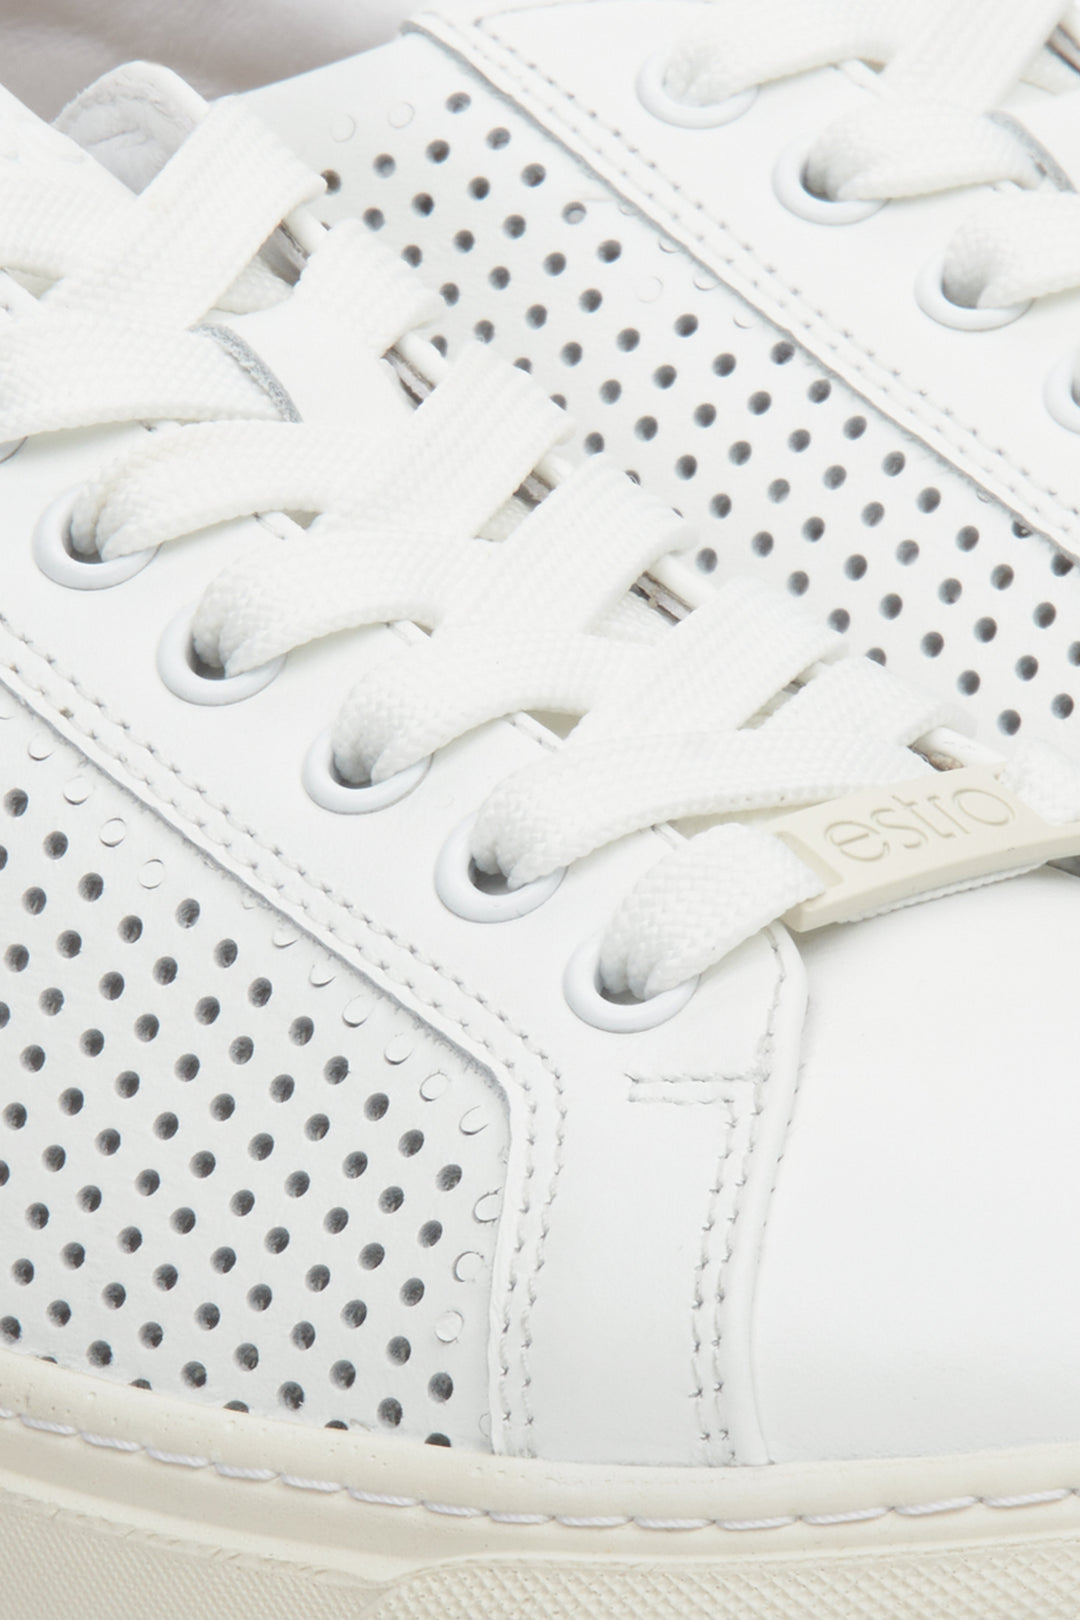 Women's white Estro fall/spring sneakers - close-up on details.